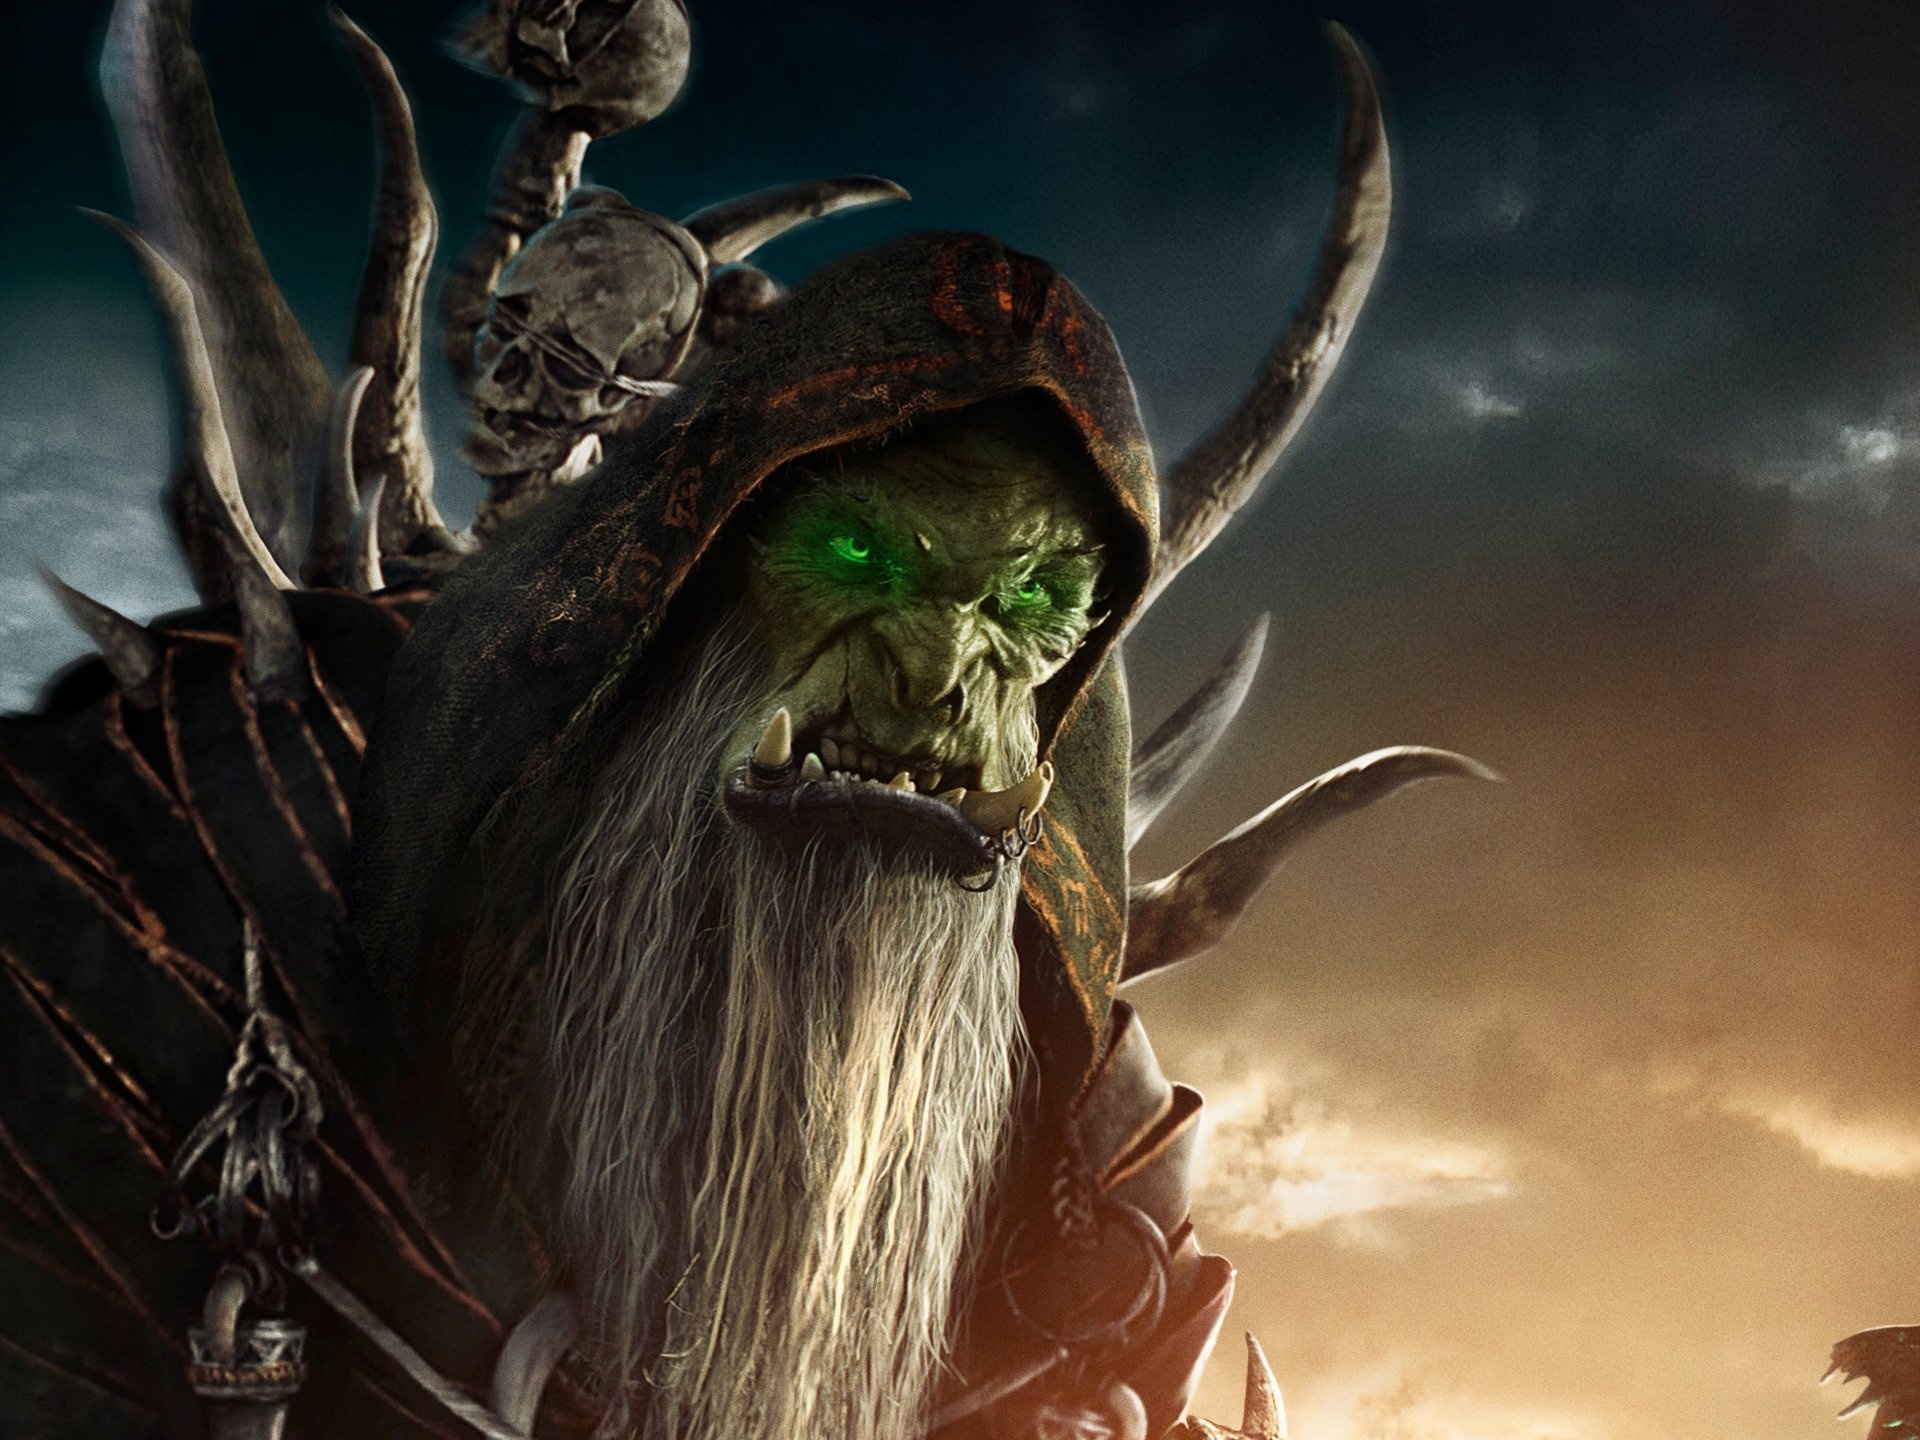 Warcraft (Movie): The Orcs are led by the orc warlock Gul'dan, who uses a powerful magic called fel. 1920x1440 HD Background.